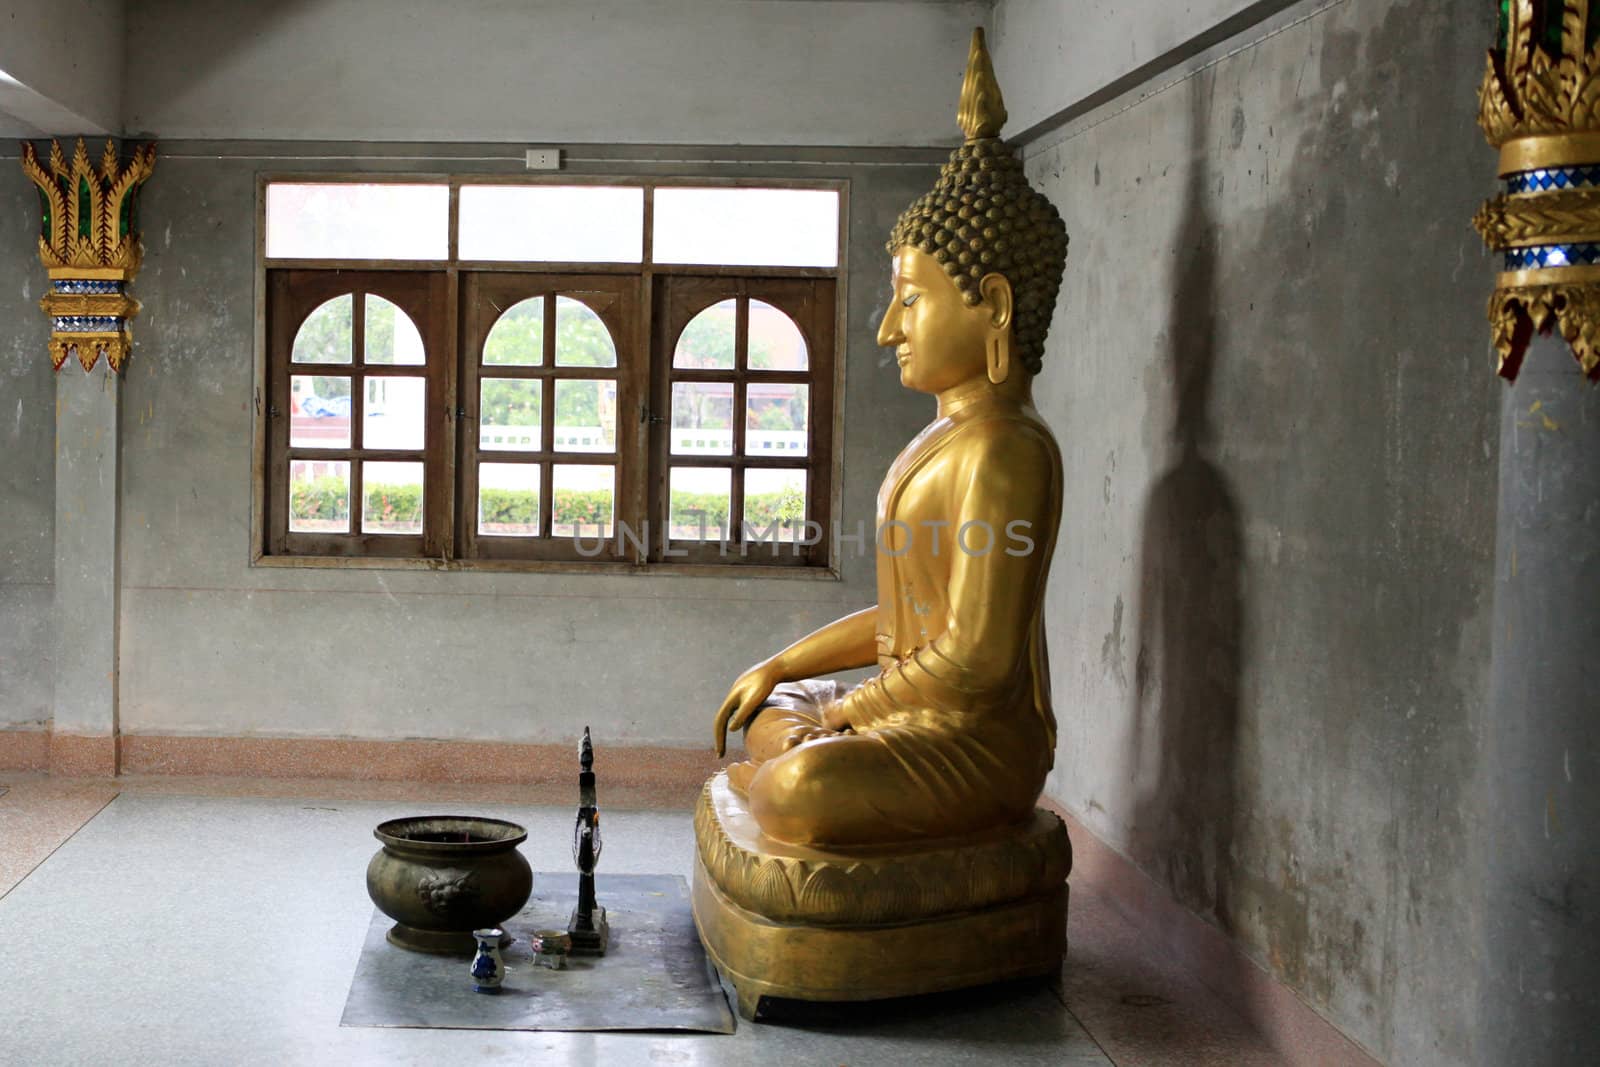 Buddha statue inside a temple in Khao Lak, Thailand - travel and tourism.